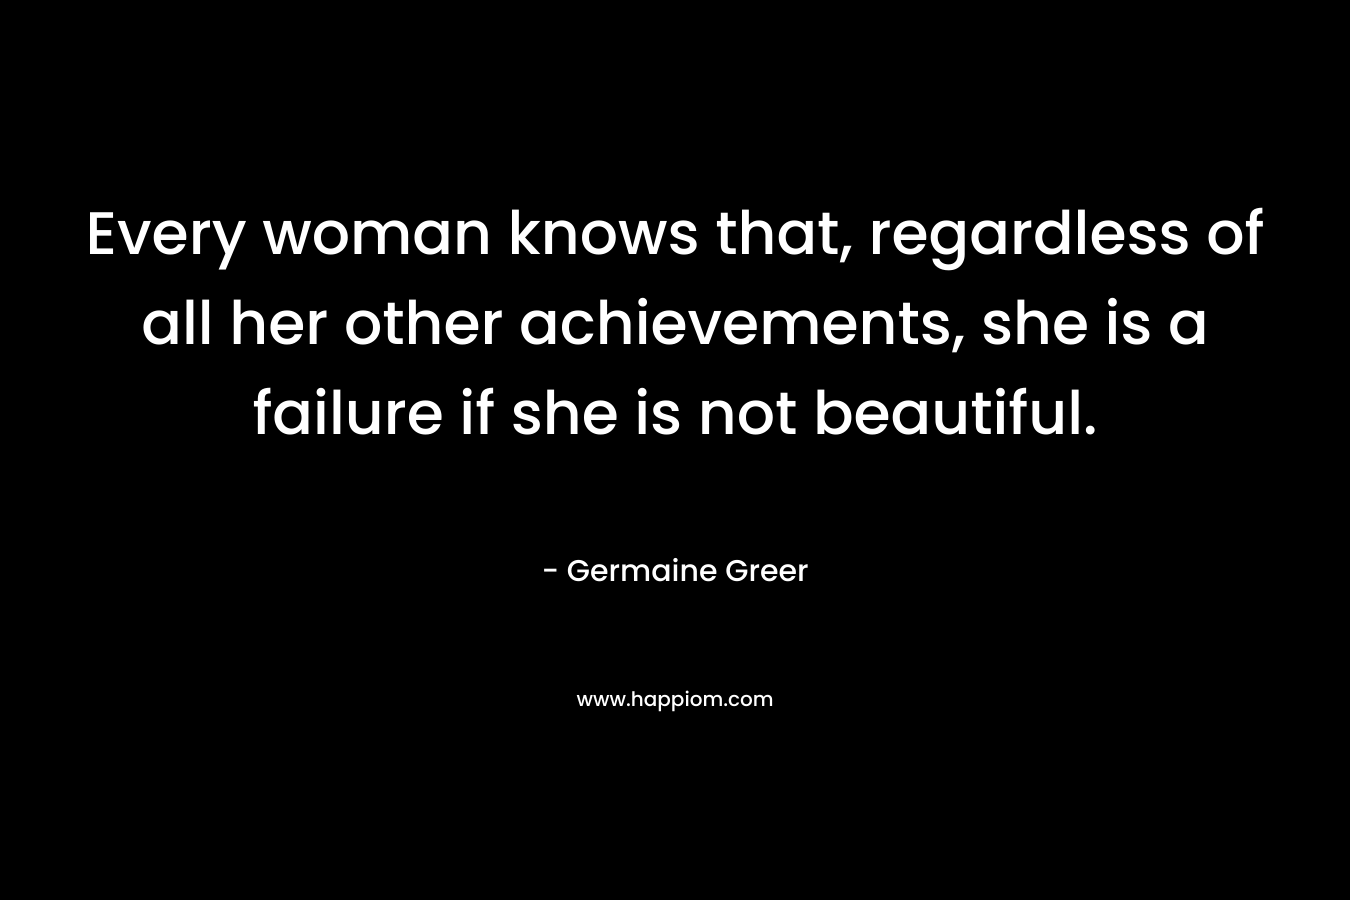 Every woman knows that, regardless of all her other achievements, she is a failure if she is not beautiful. – Germaine Greer